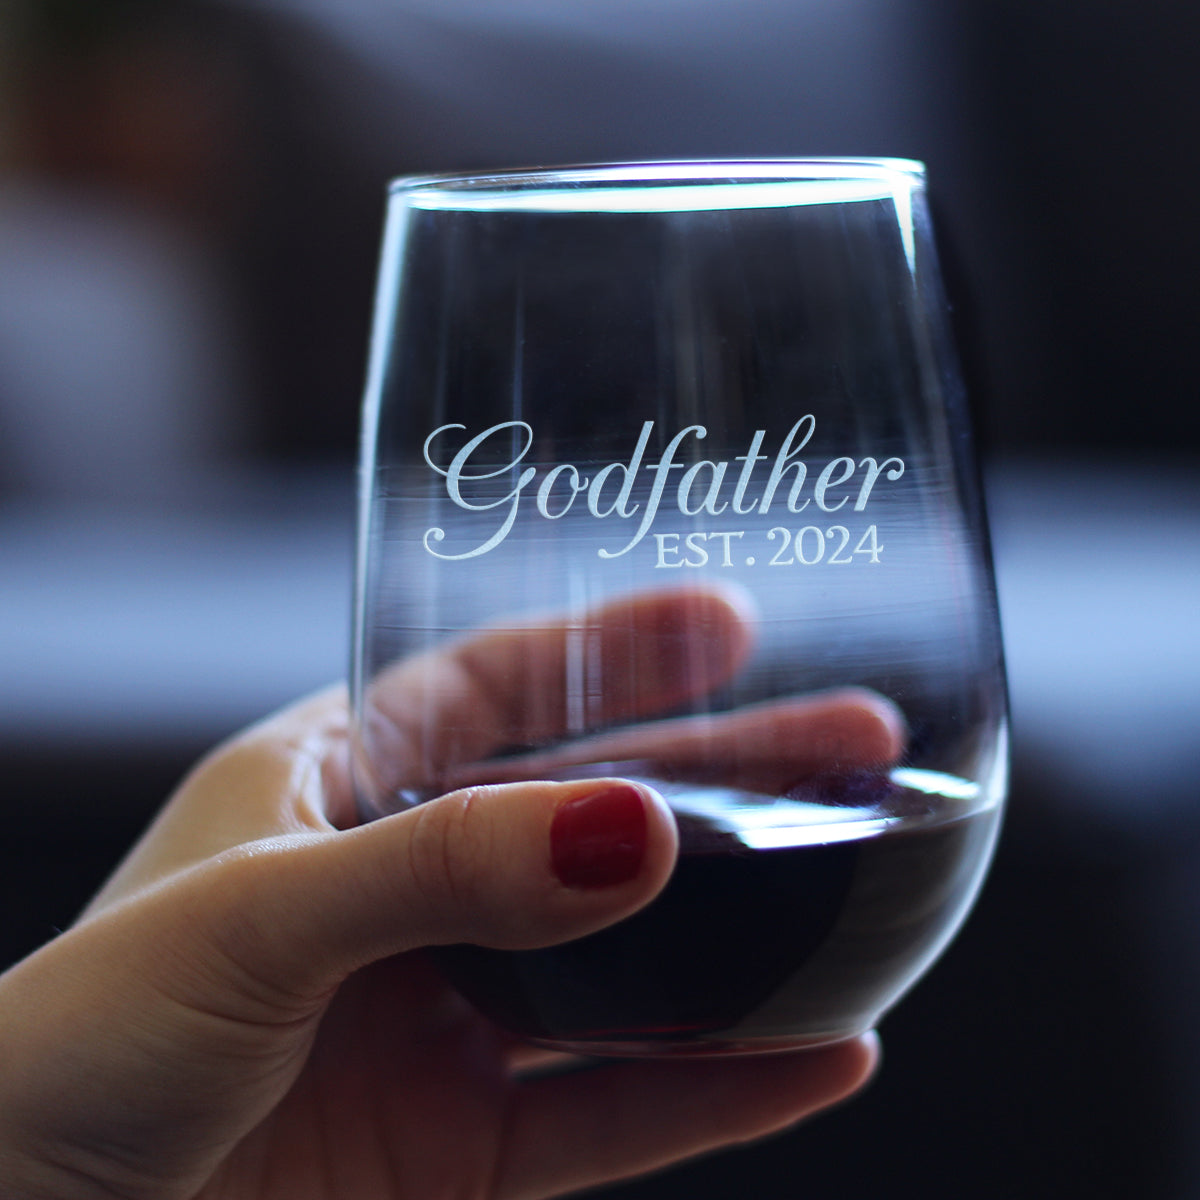 Godfather Est 2024 - New Godfather Stemless Wine Glass Proposal Gift for First Time Godparents - Decorative 17 Oz Large Glasses